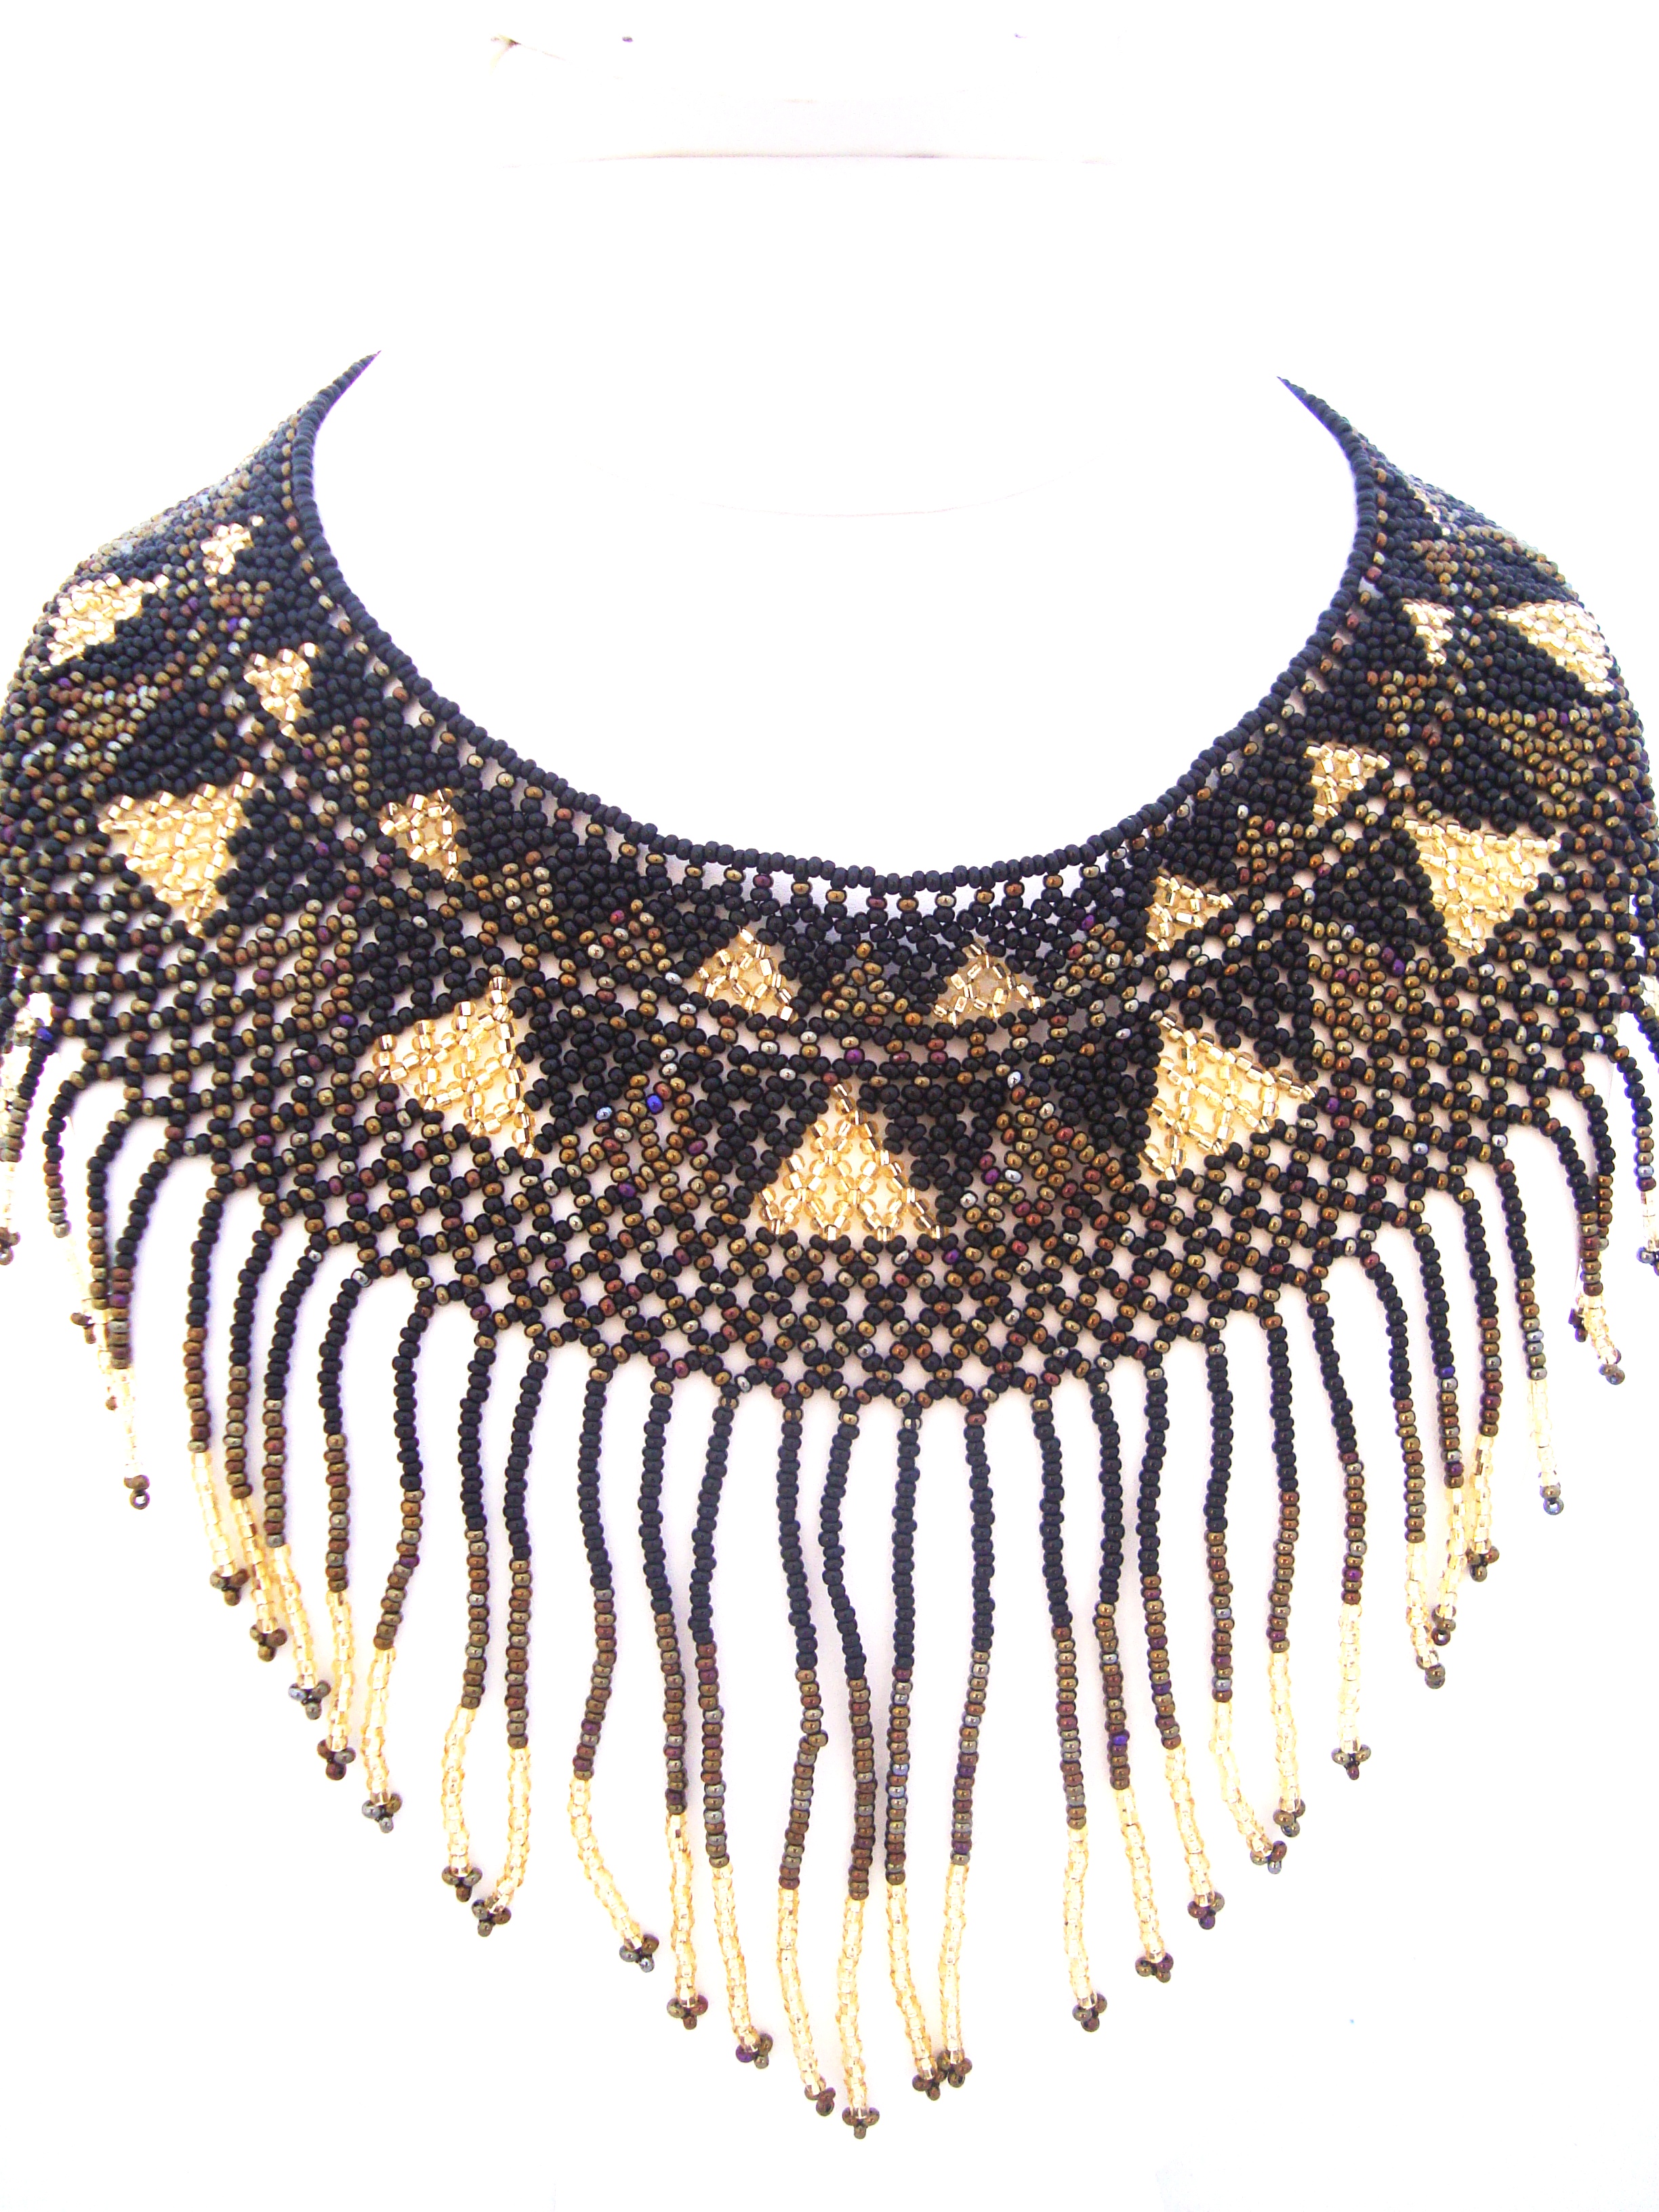 Black and Gold Egyptian Collar with Decadent Fringe